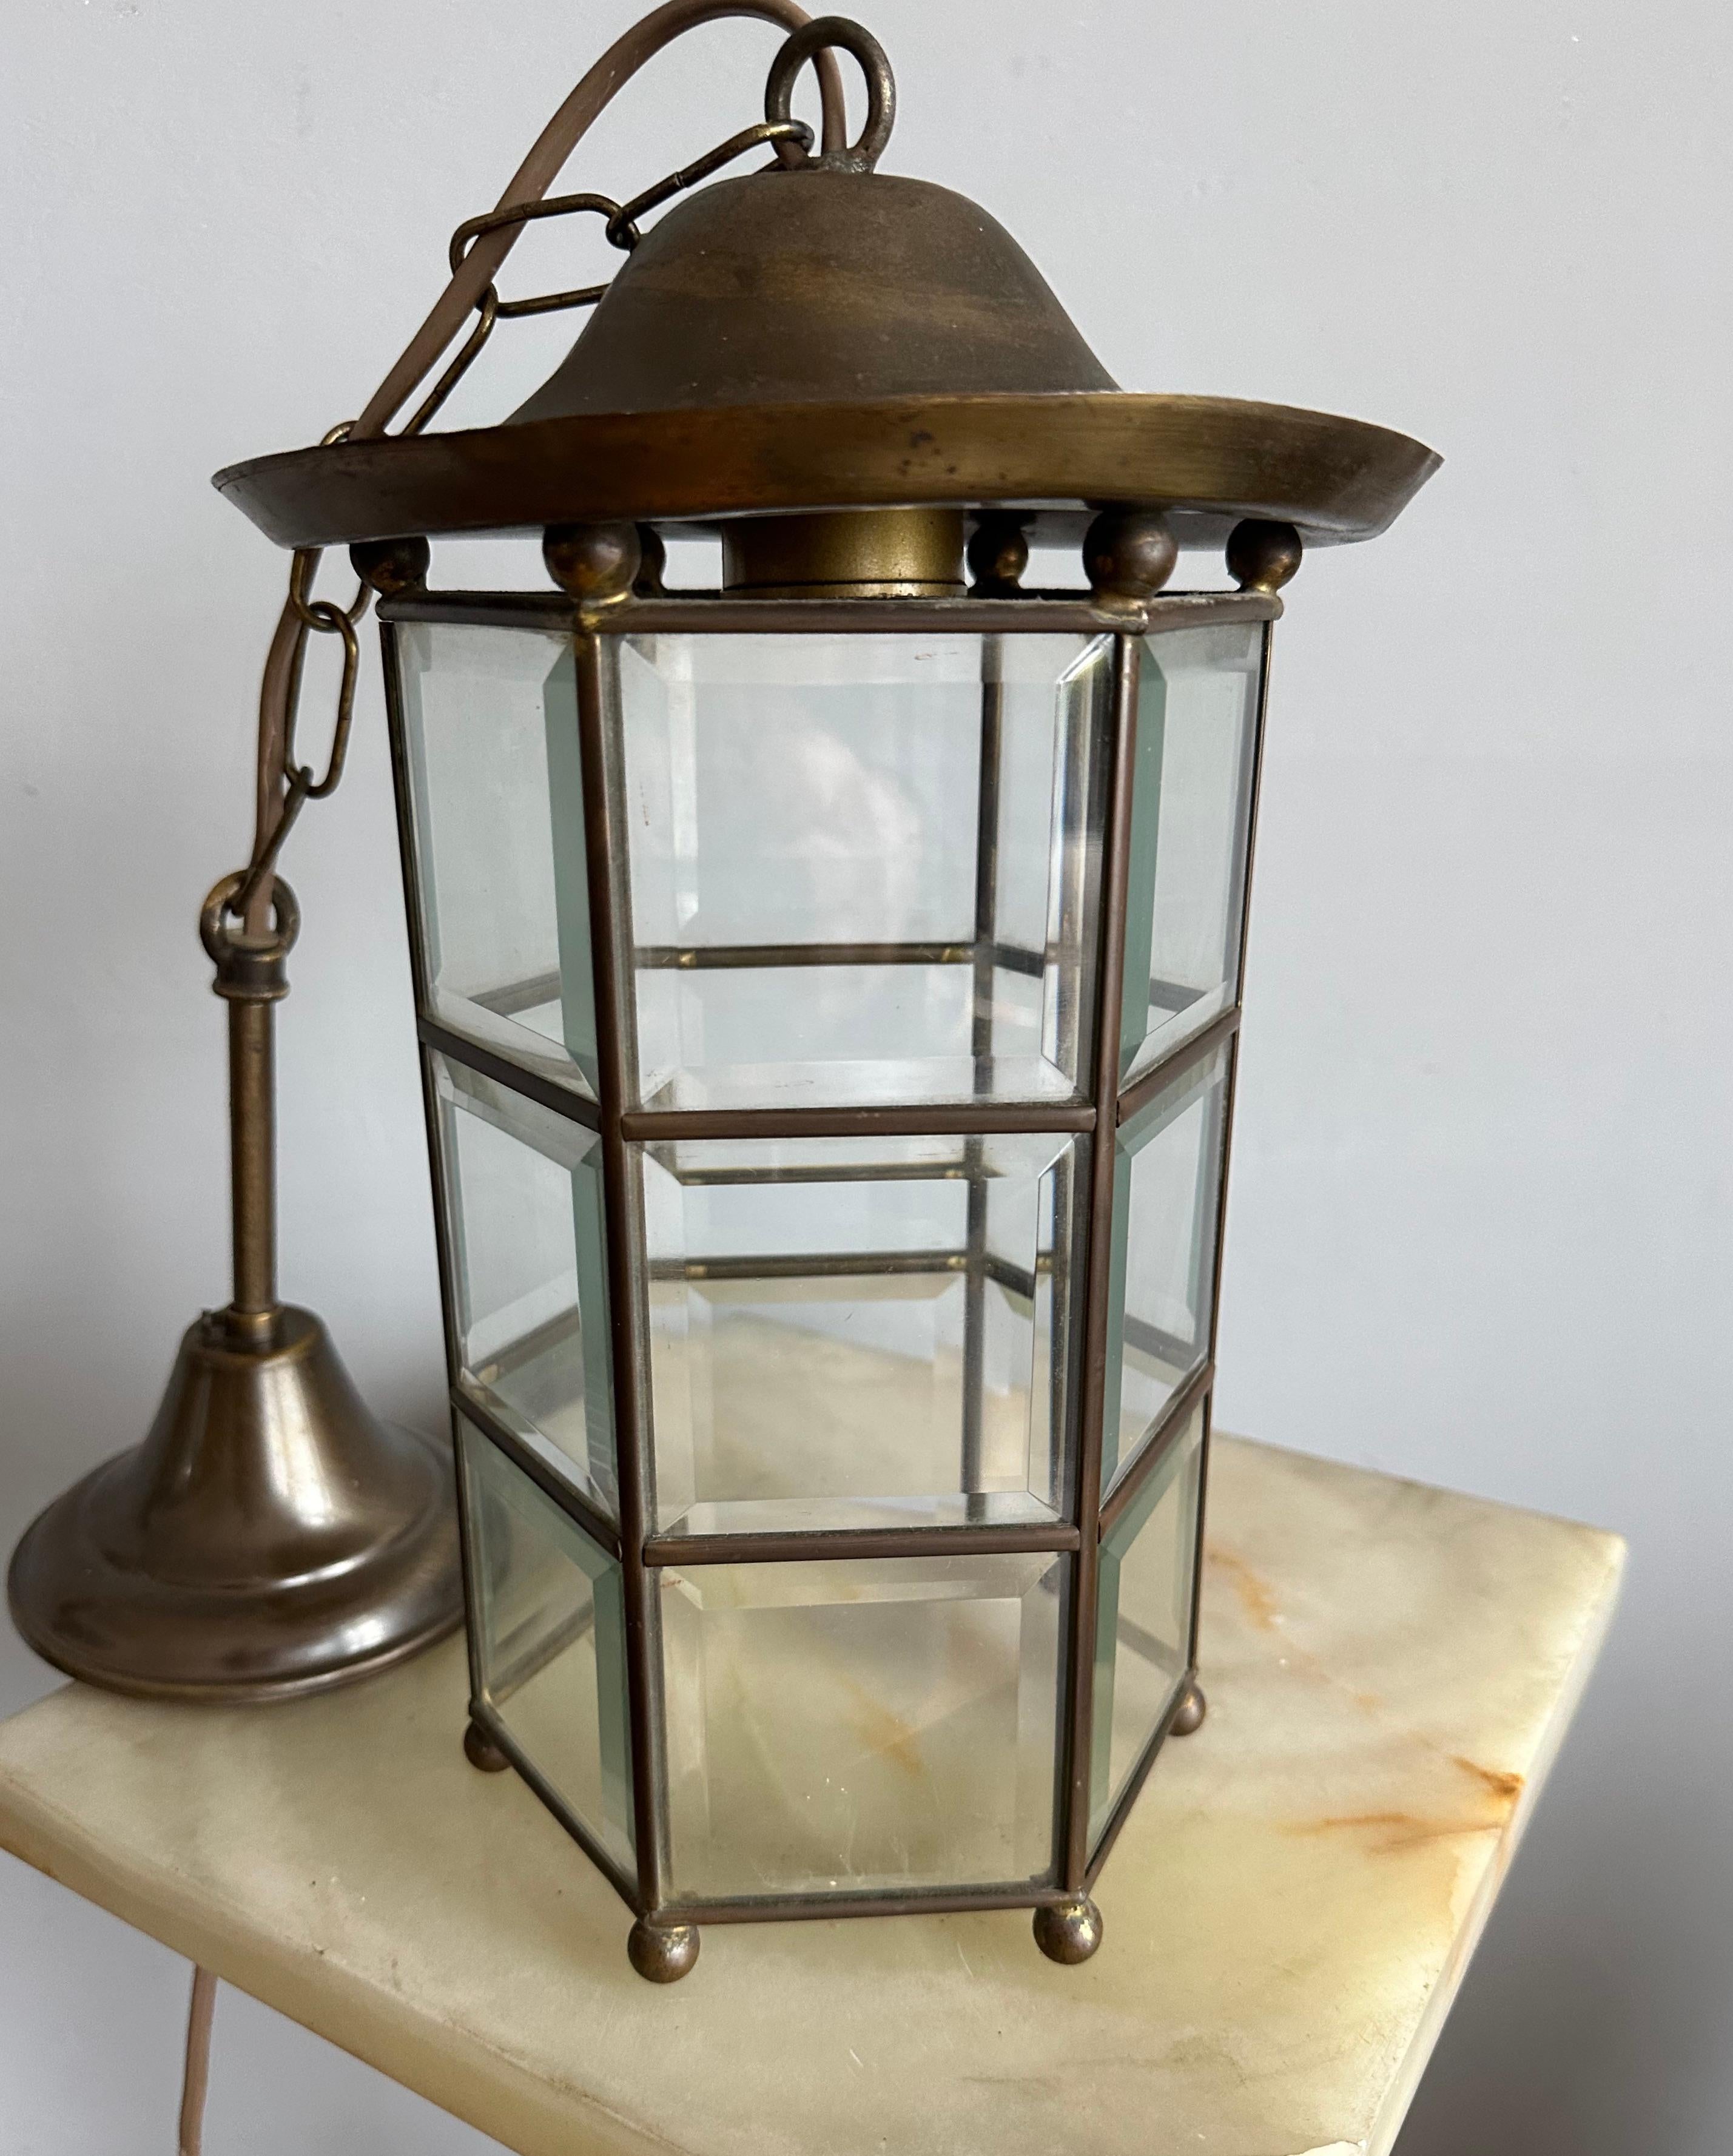 Small size and excellent condition, brass and beveled glass lantern.

This stylish and timeless design pendant is all handmade and in excellent condition. This hexagonal pendant has a total of  18 beveled glass 'window sections' framed in brass and